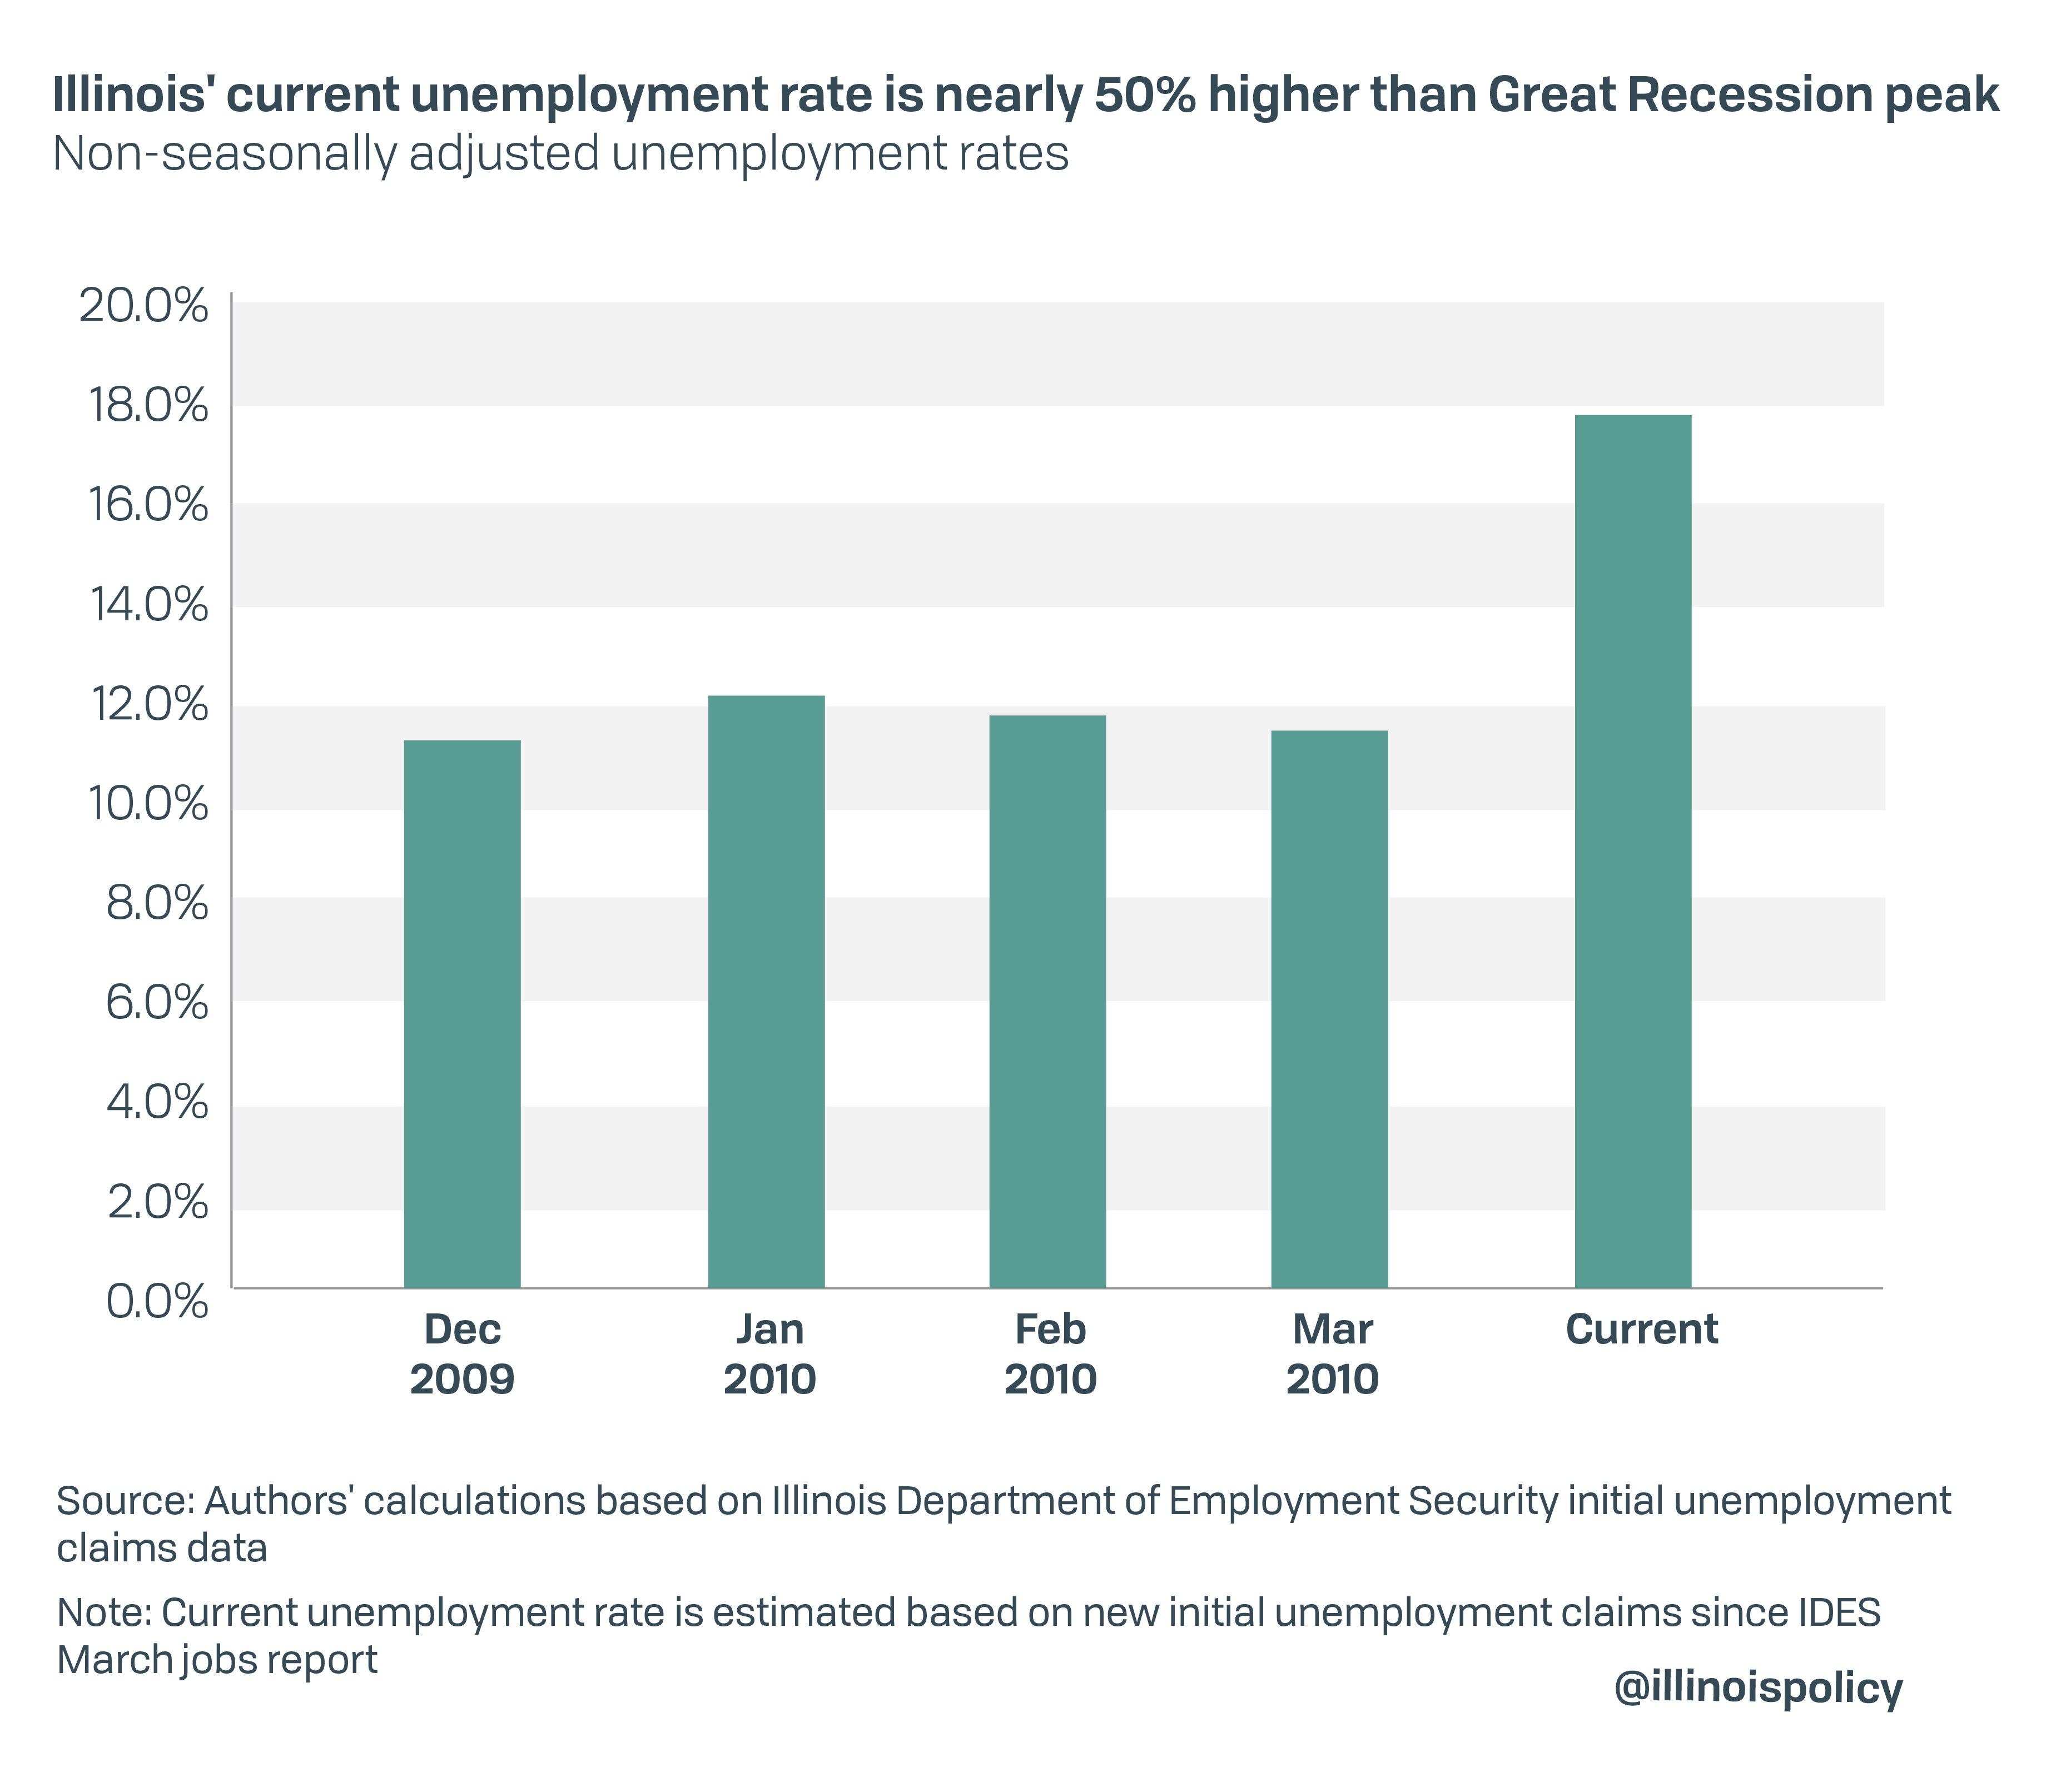 Illinois' current unemployment rate is nearly 50% higher than Great Recession peak